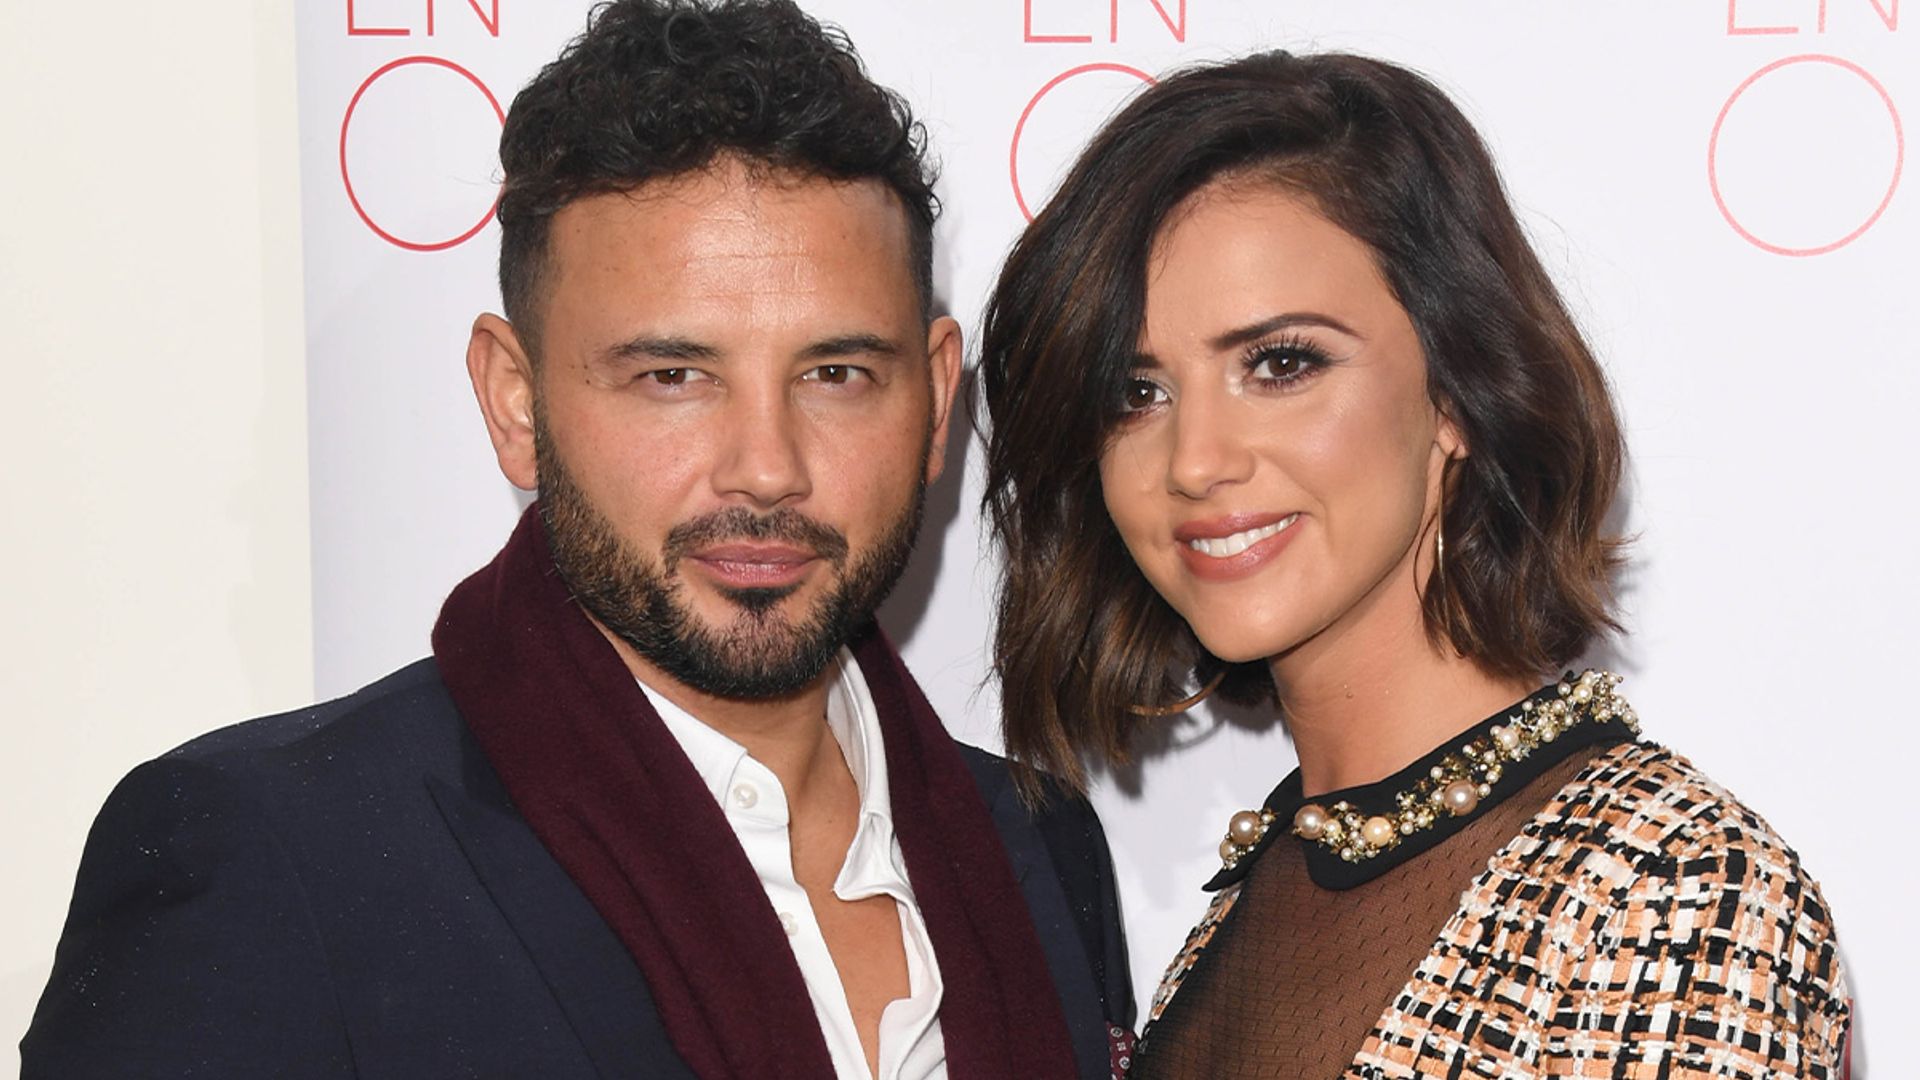 Ryan Thomas falls through wall during home renovations with Lucy Mecklenburgh